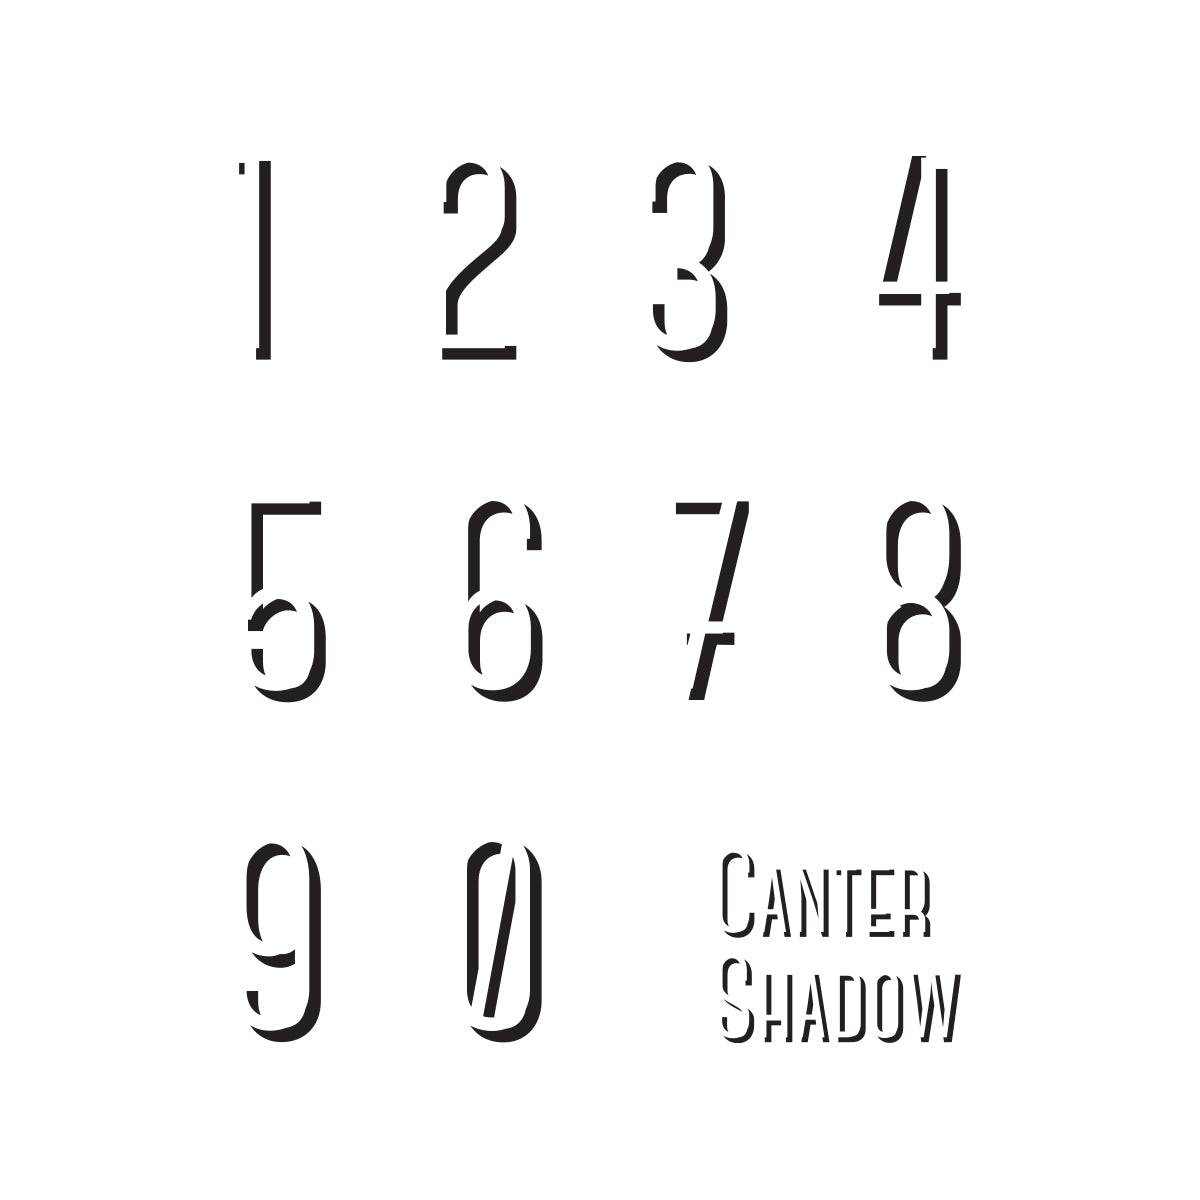 Canter Shadow Number.